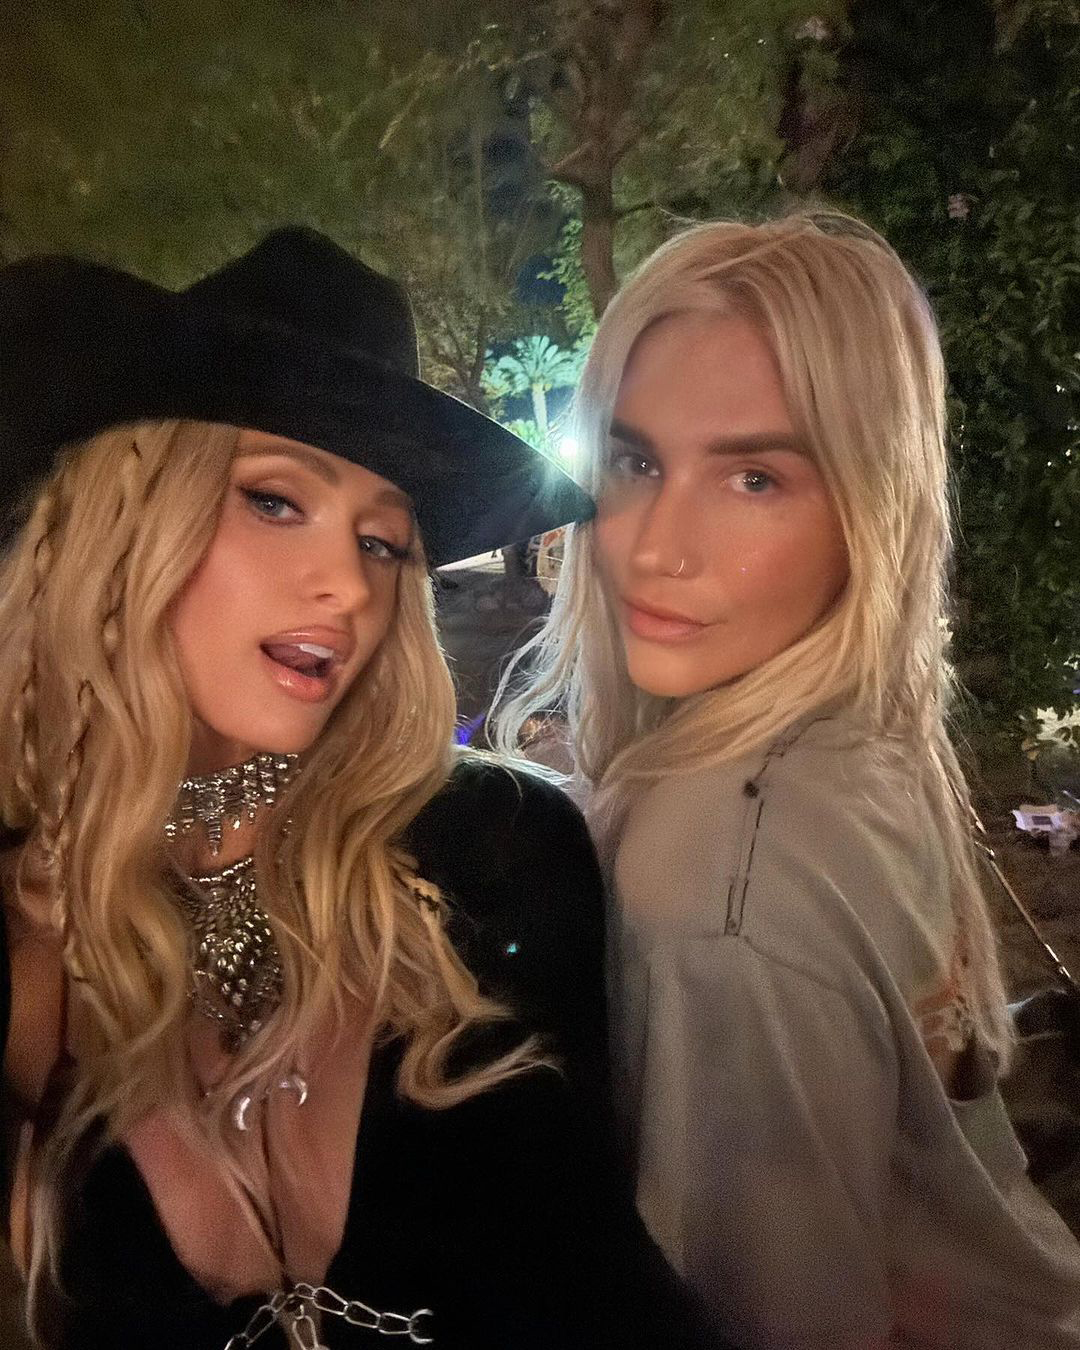 The two 2000s icons were spotted together at the invite-only party, Neon Carnival